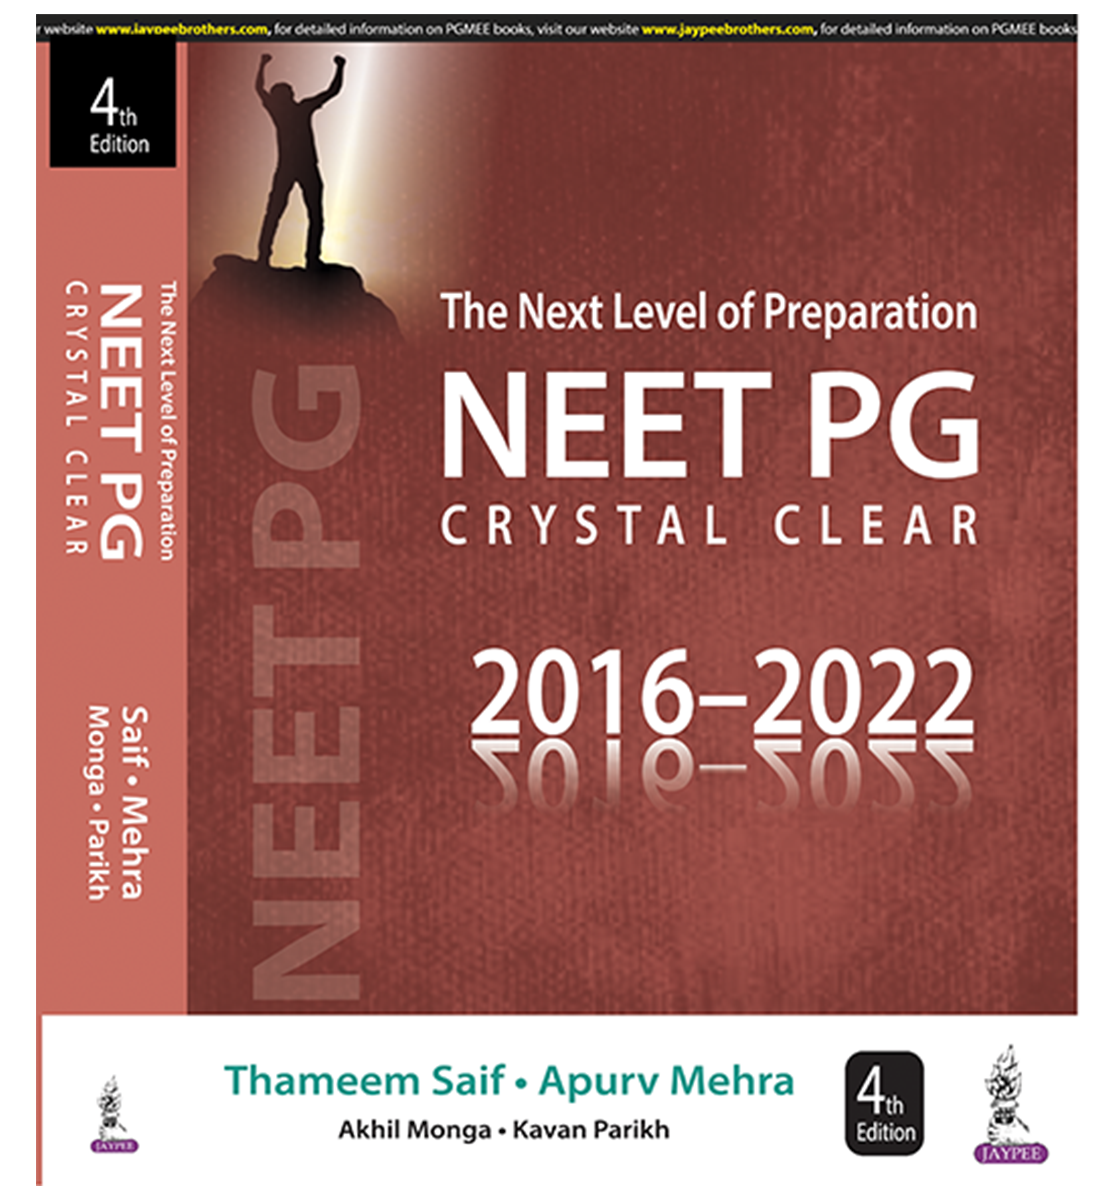 The Next Level of Preparation NEET PG Crystal Clear